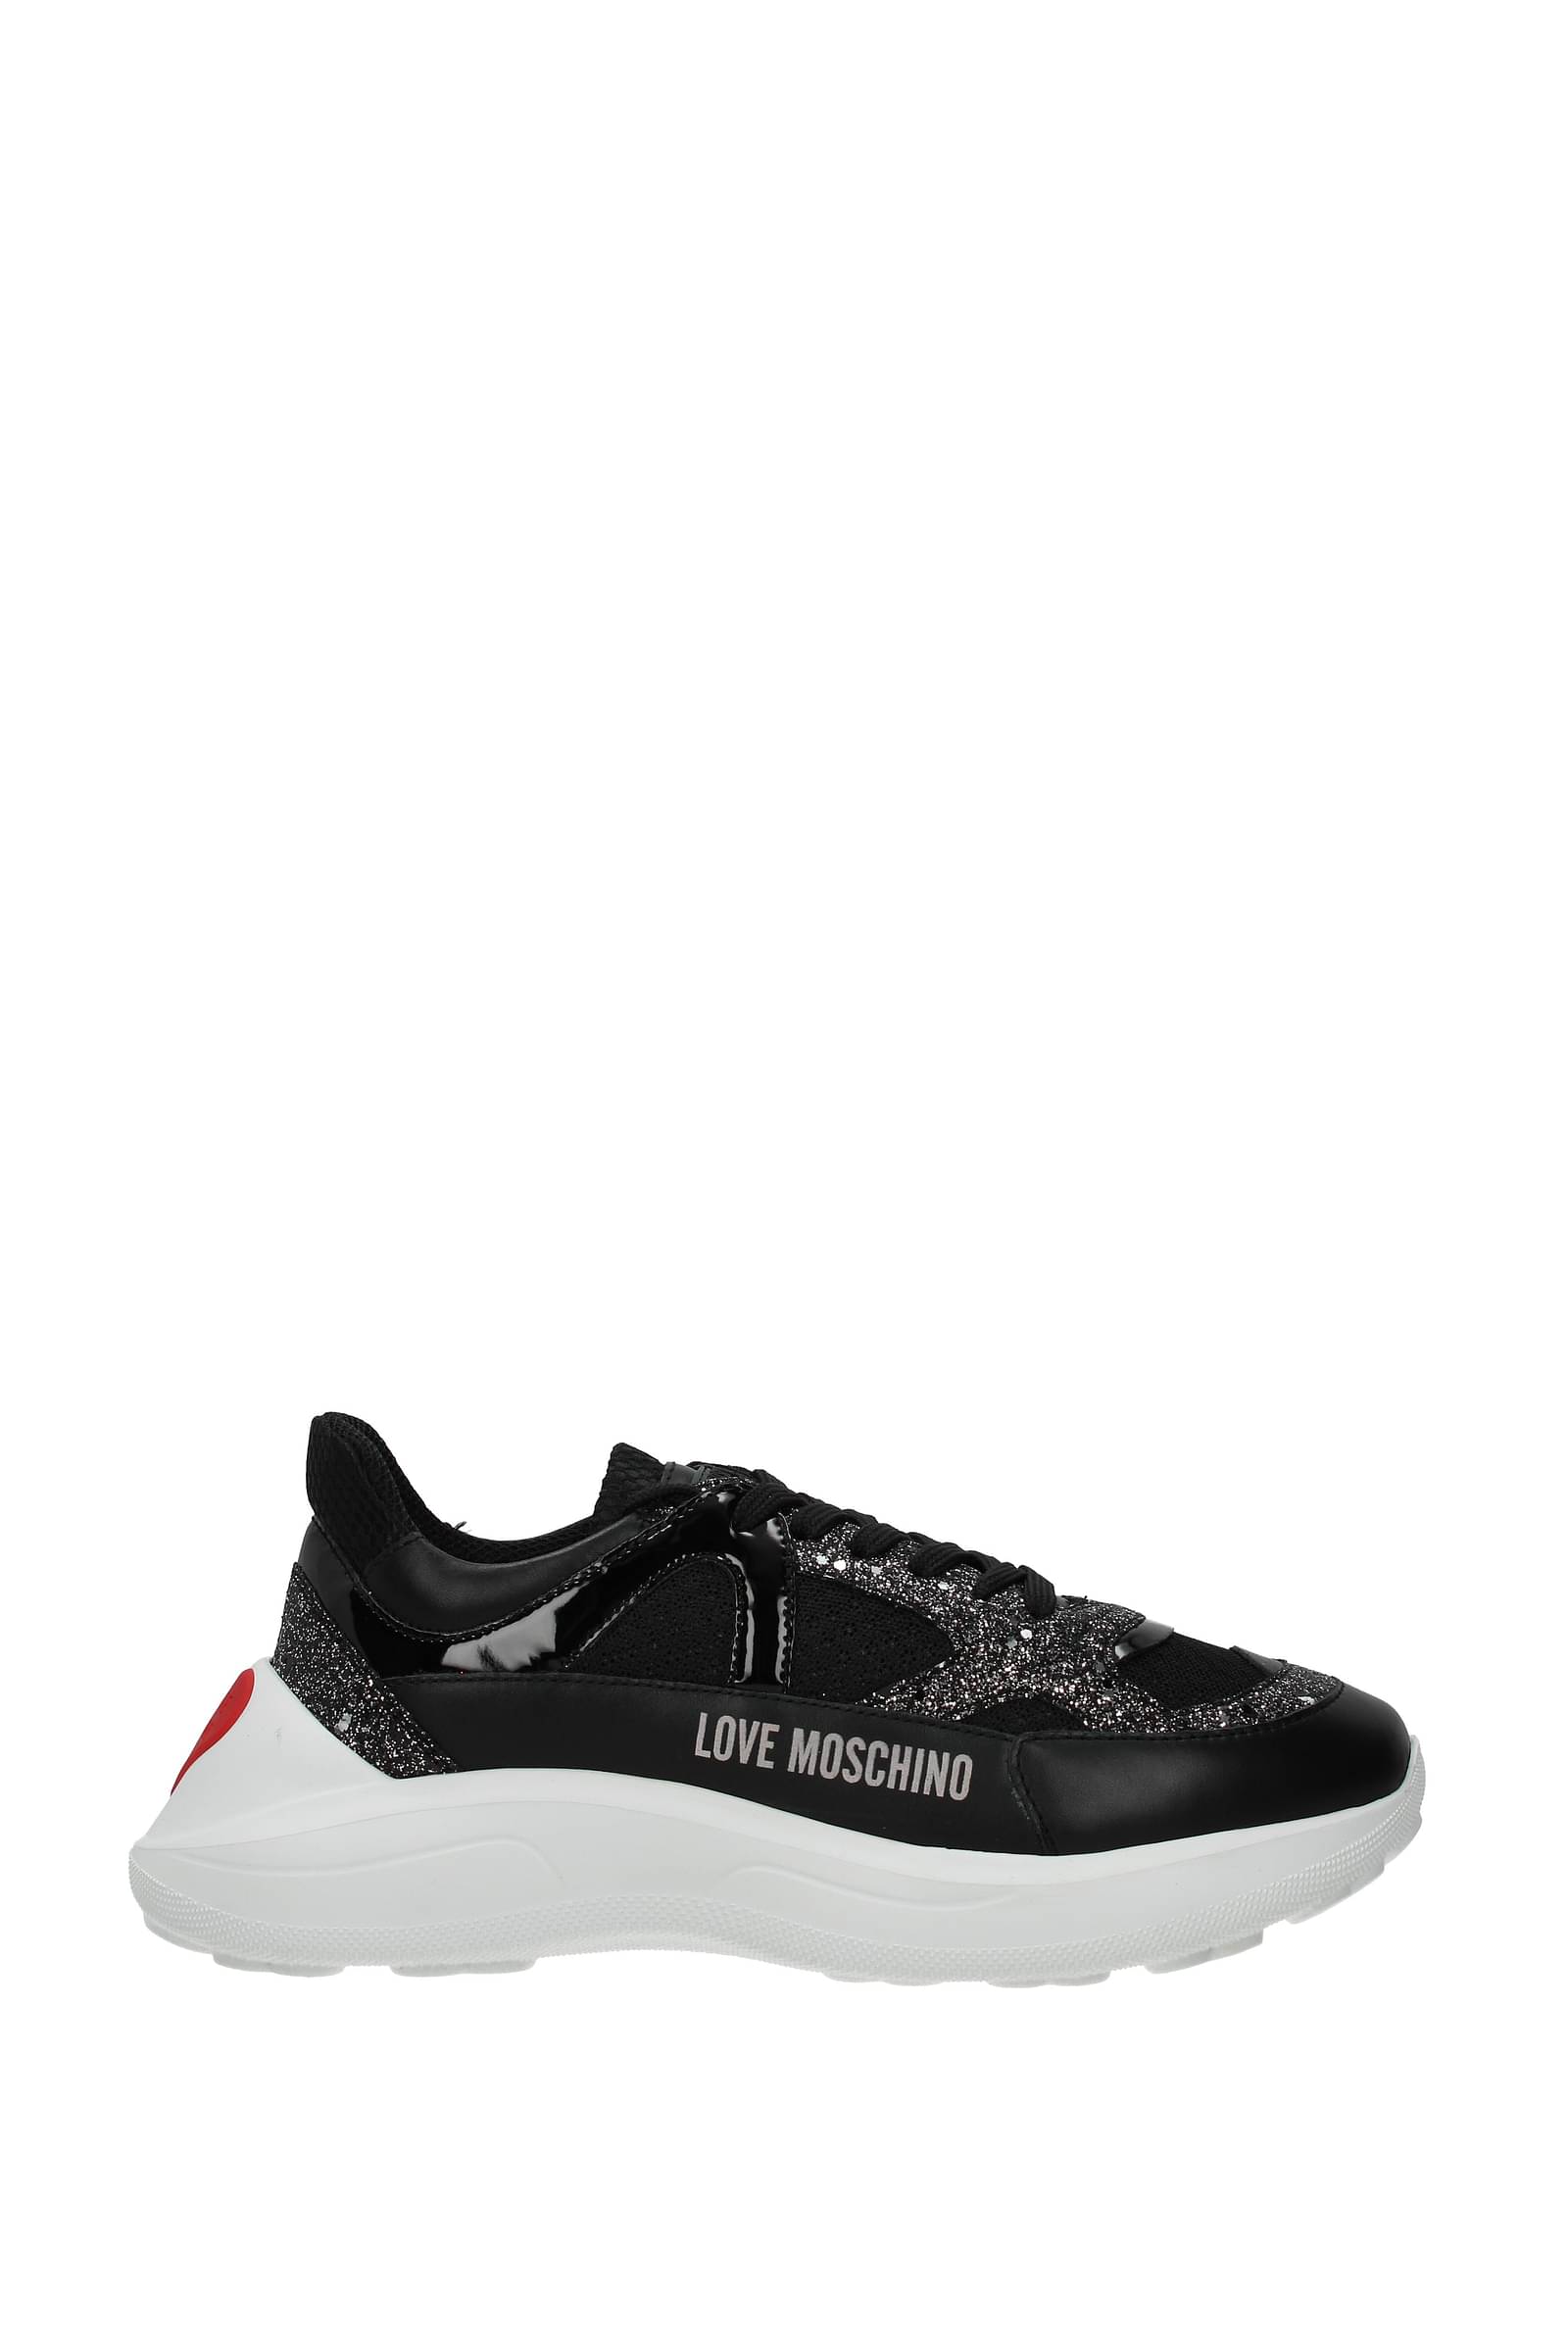 Love Moschino sneakers discounts for him and her